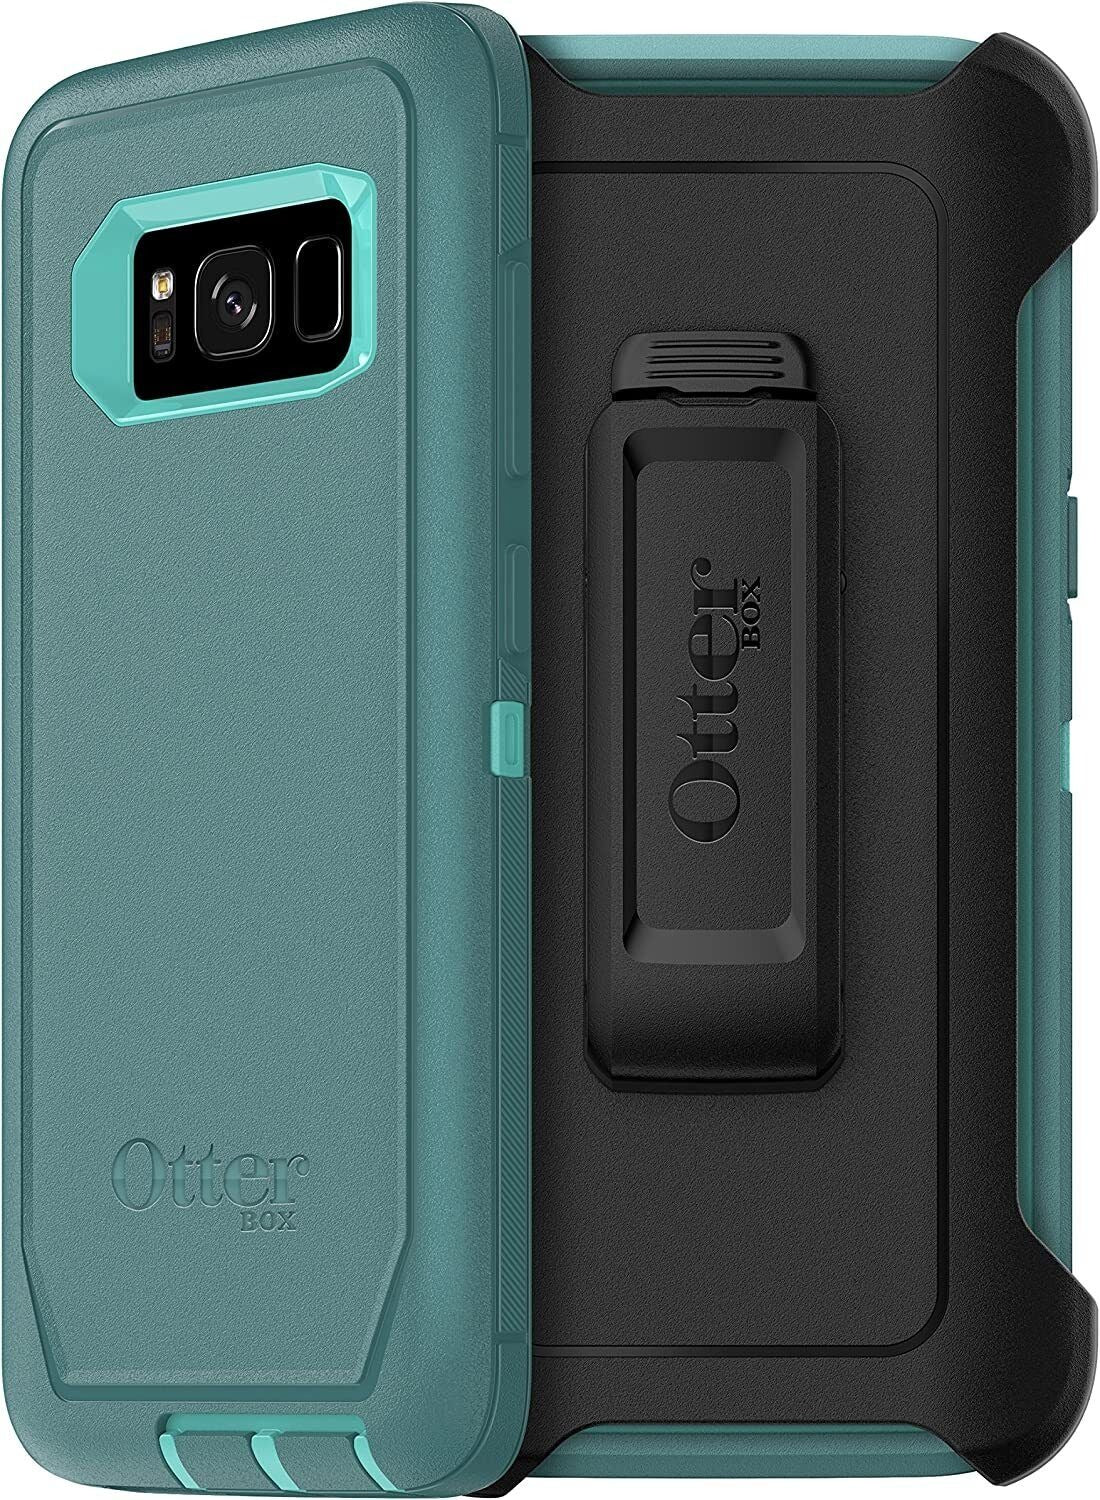 OtterBox DEFENDER SERIES Case &amp; Holster for Samsung Galaxy S8 Plus - Aqua Mint (New)